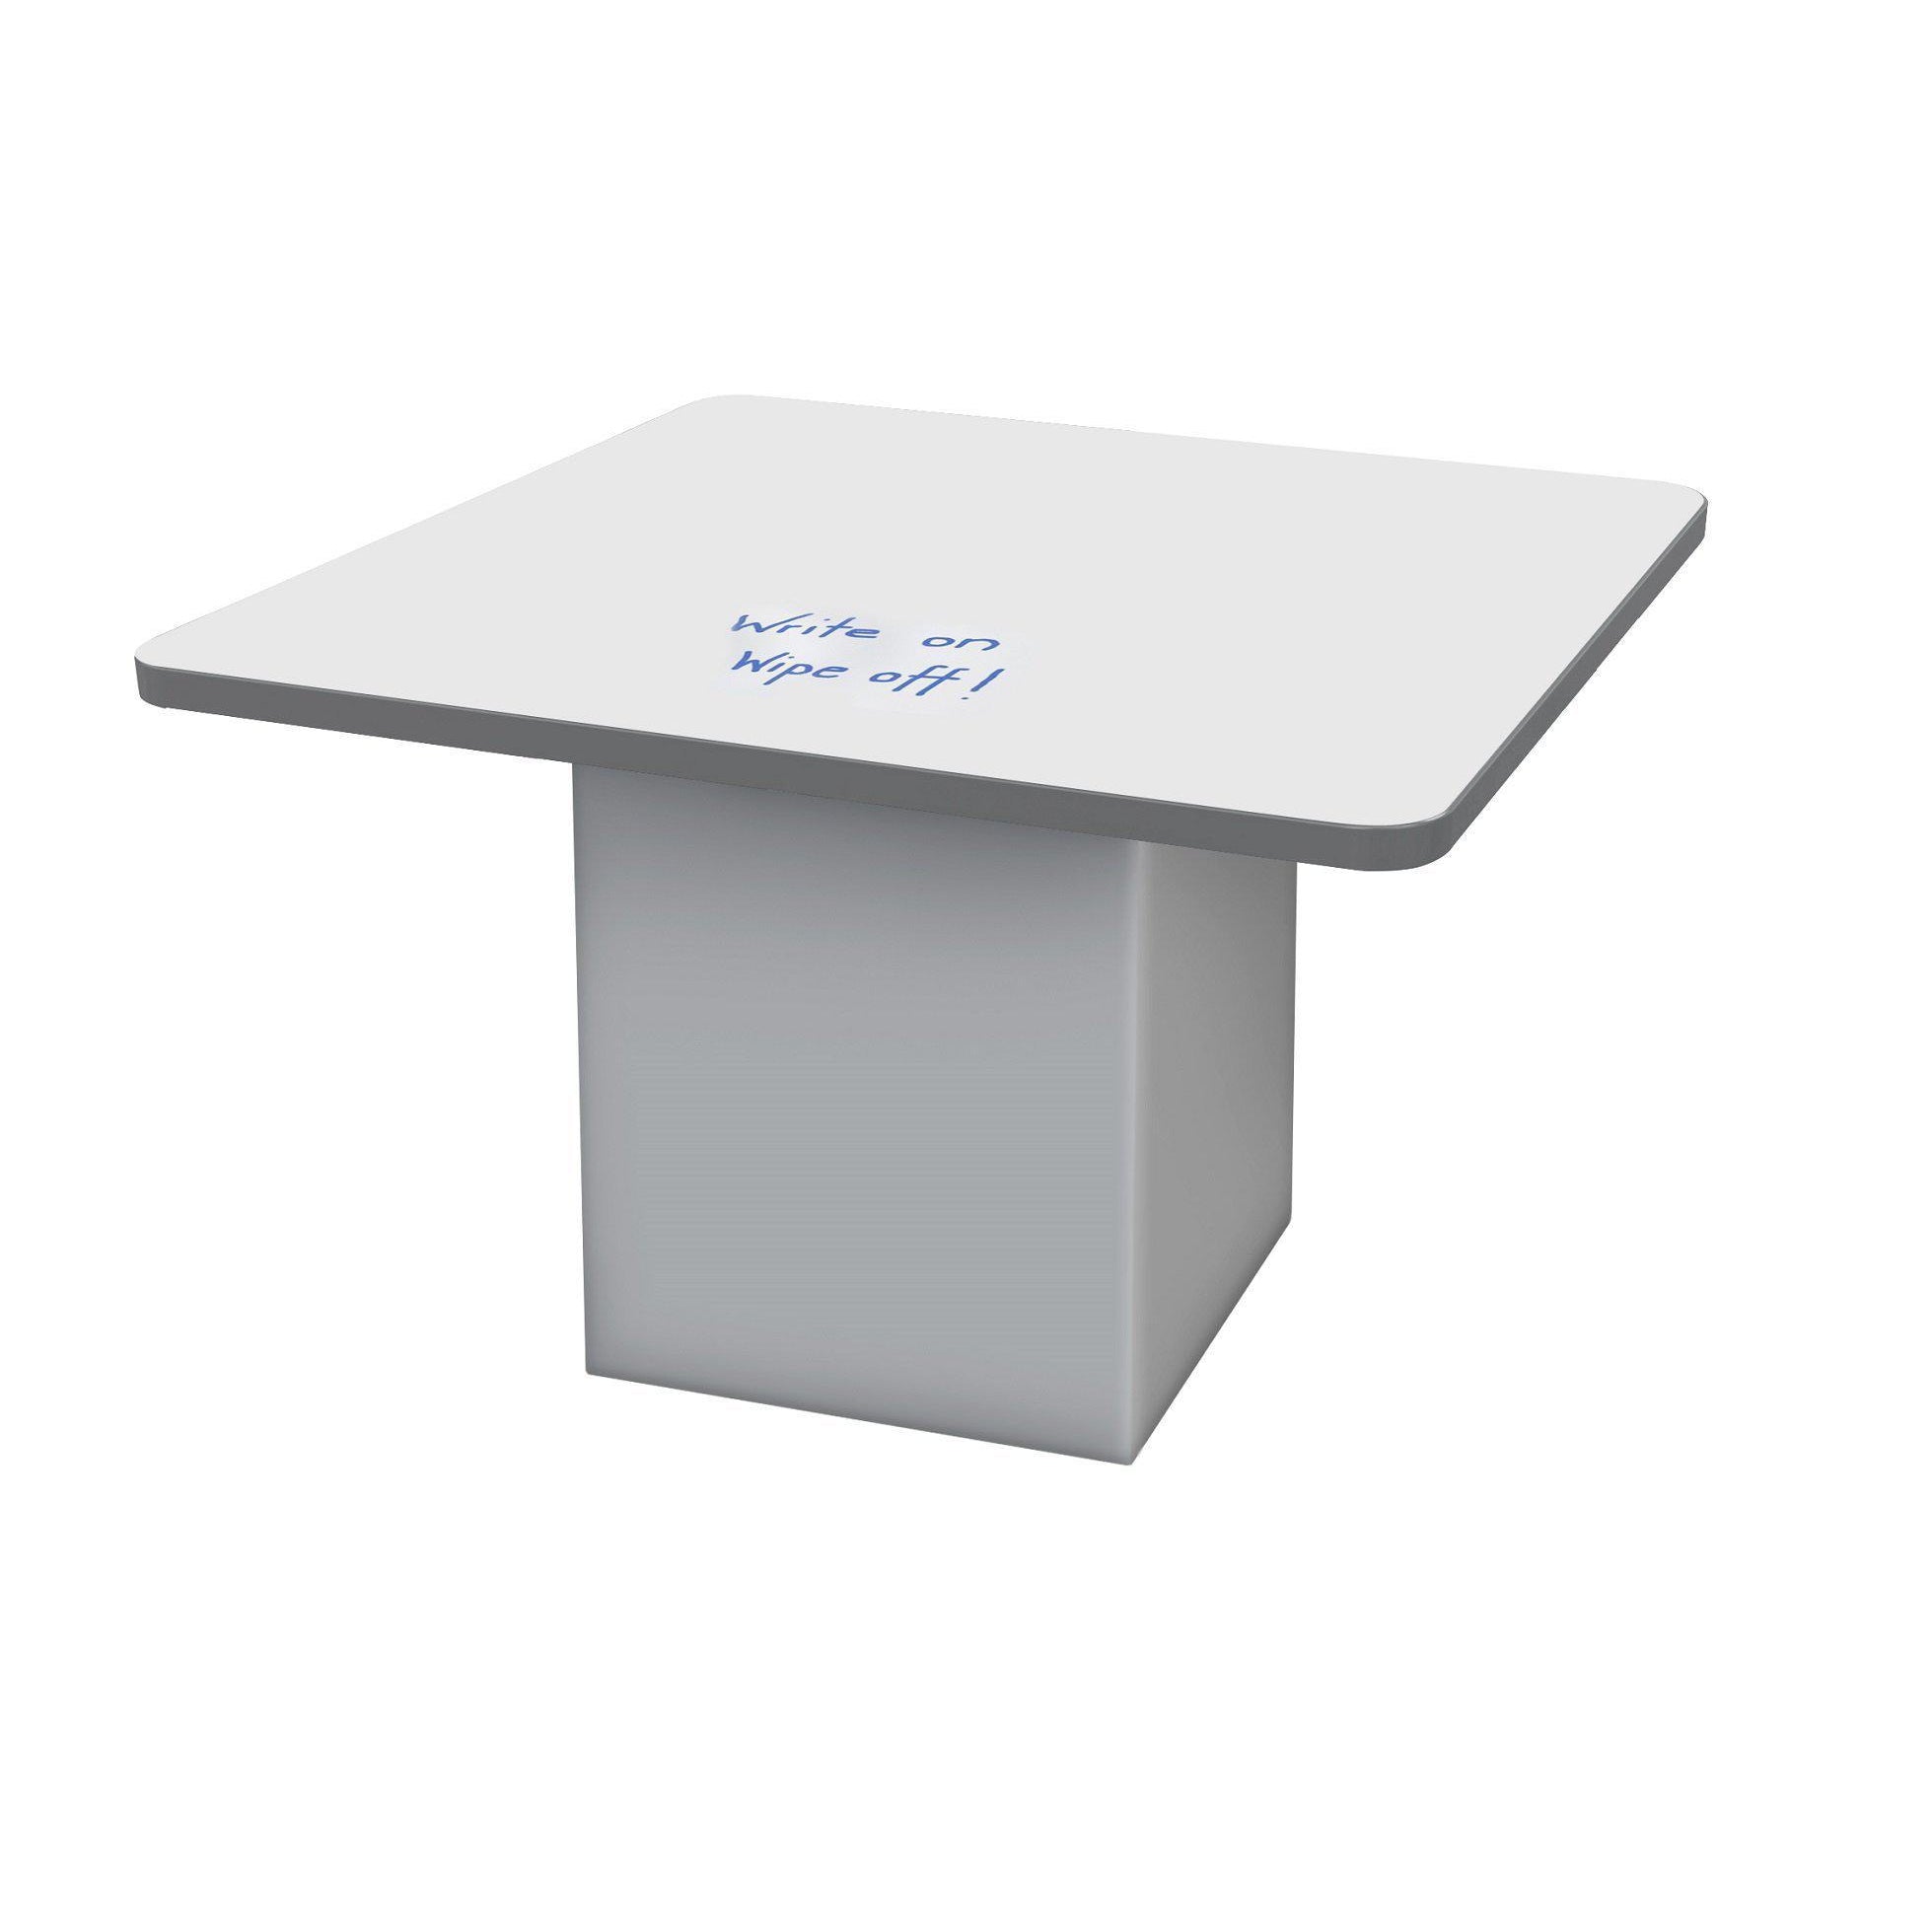 Sonik™ Soft Seating 48" Square Table with Markerboard Top and Power/Data Supply-Soft Seating-29"-Markerboard/Gray-Frost